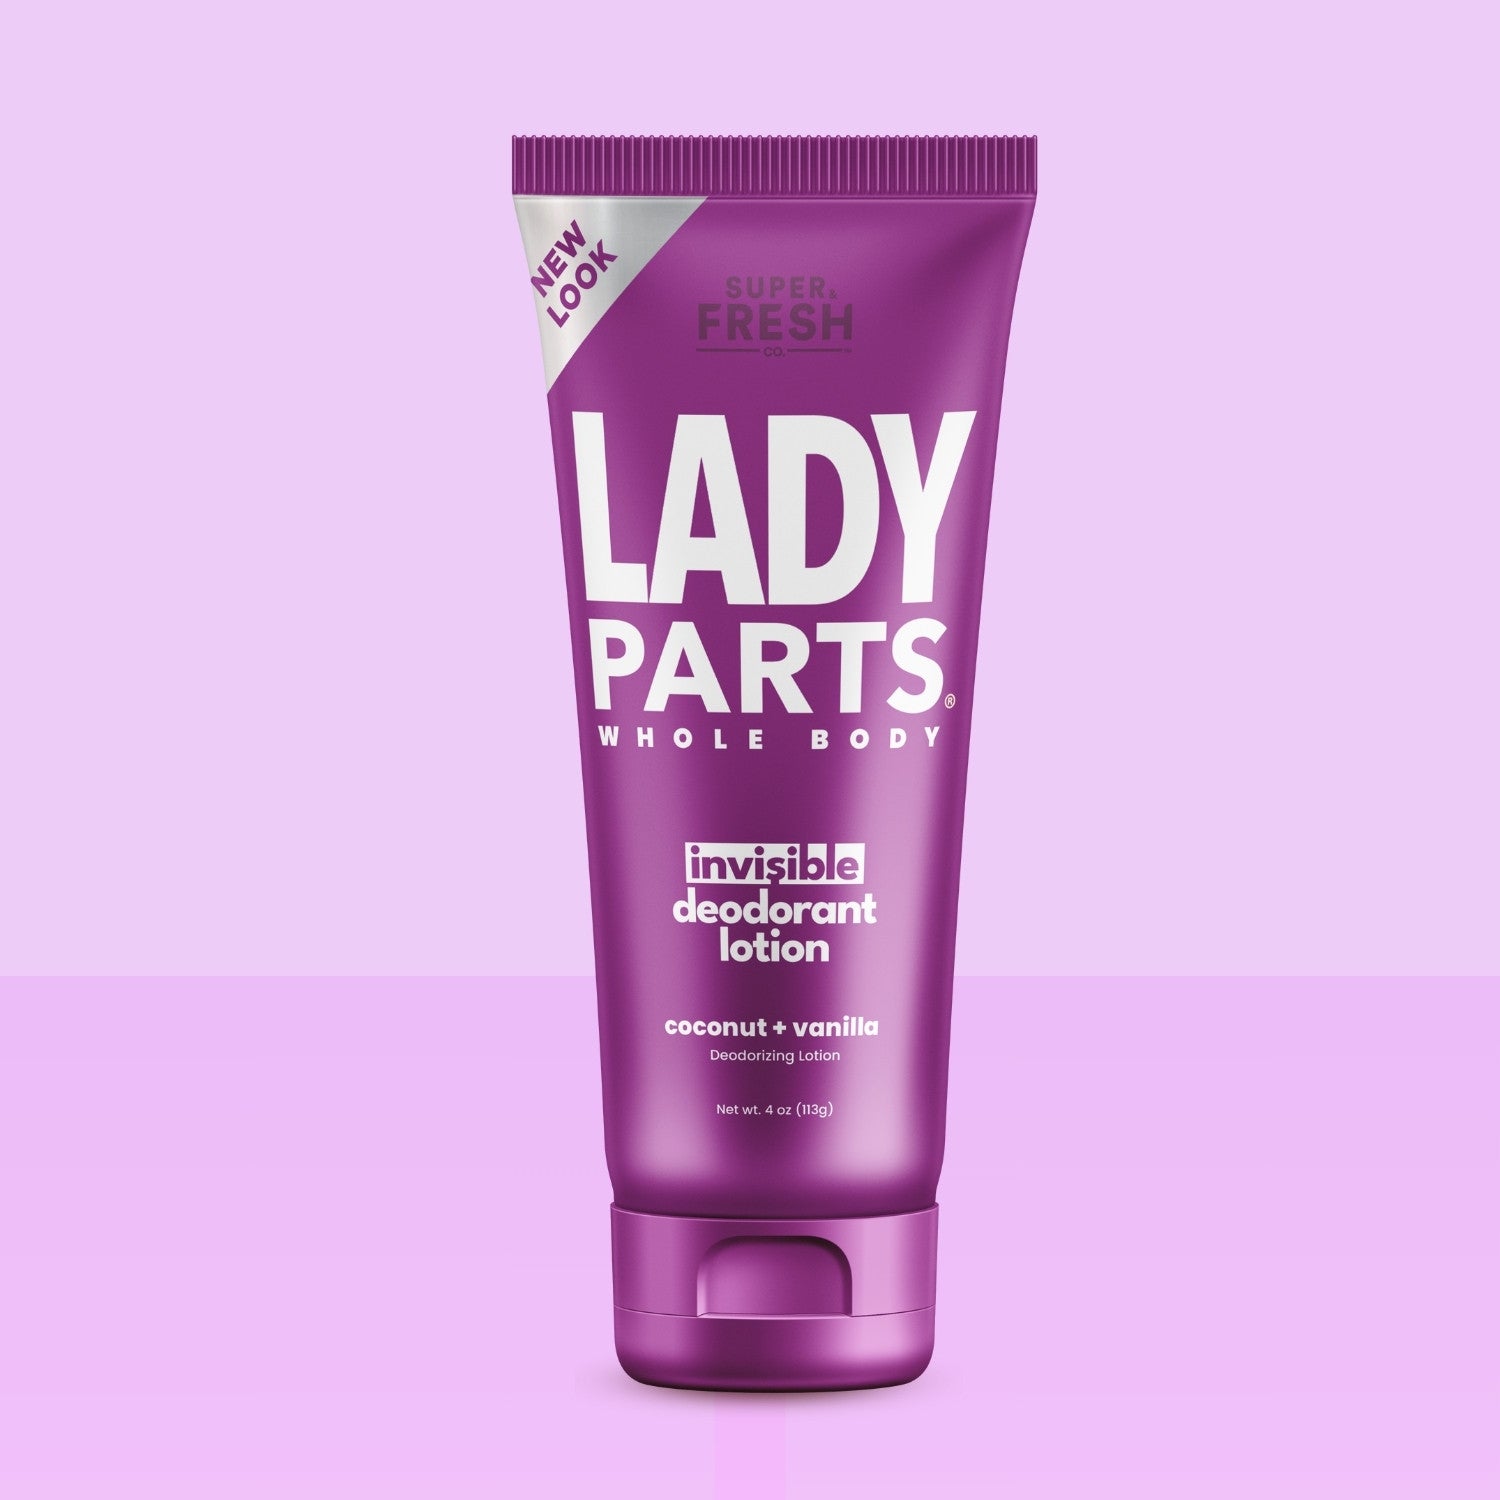 Lady Parts Whole Body Deodorant Lotion - Invisible